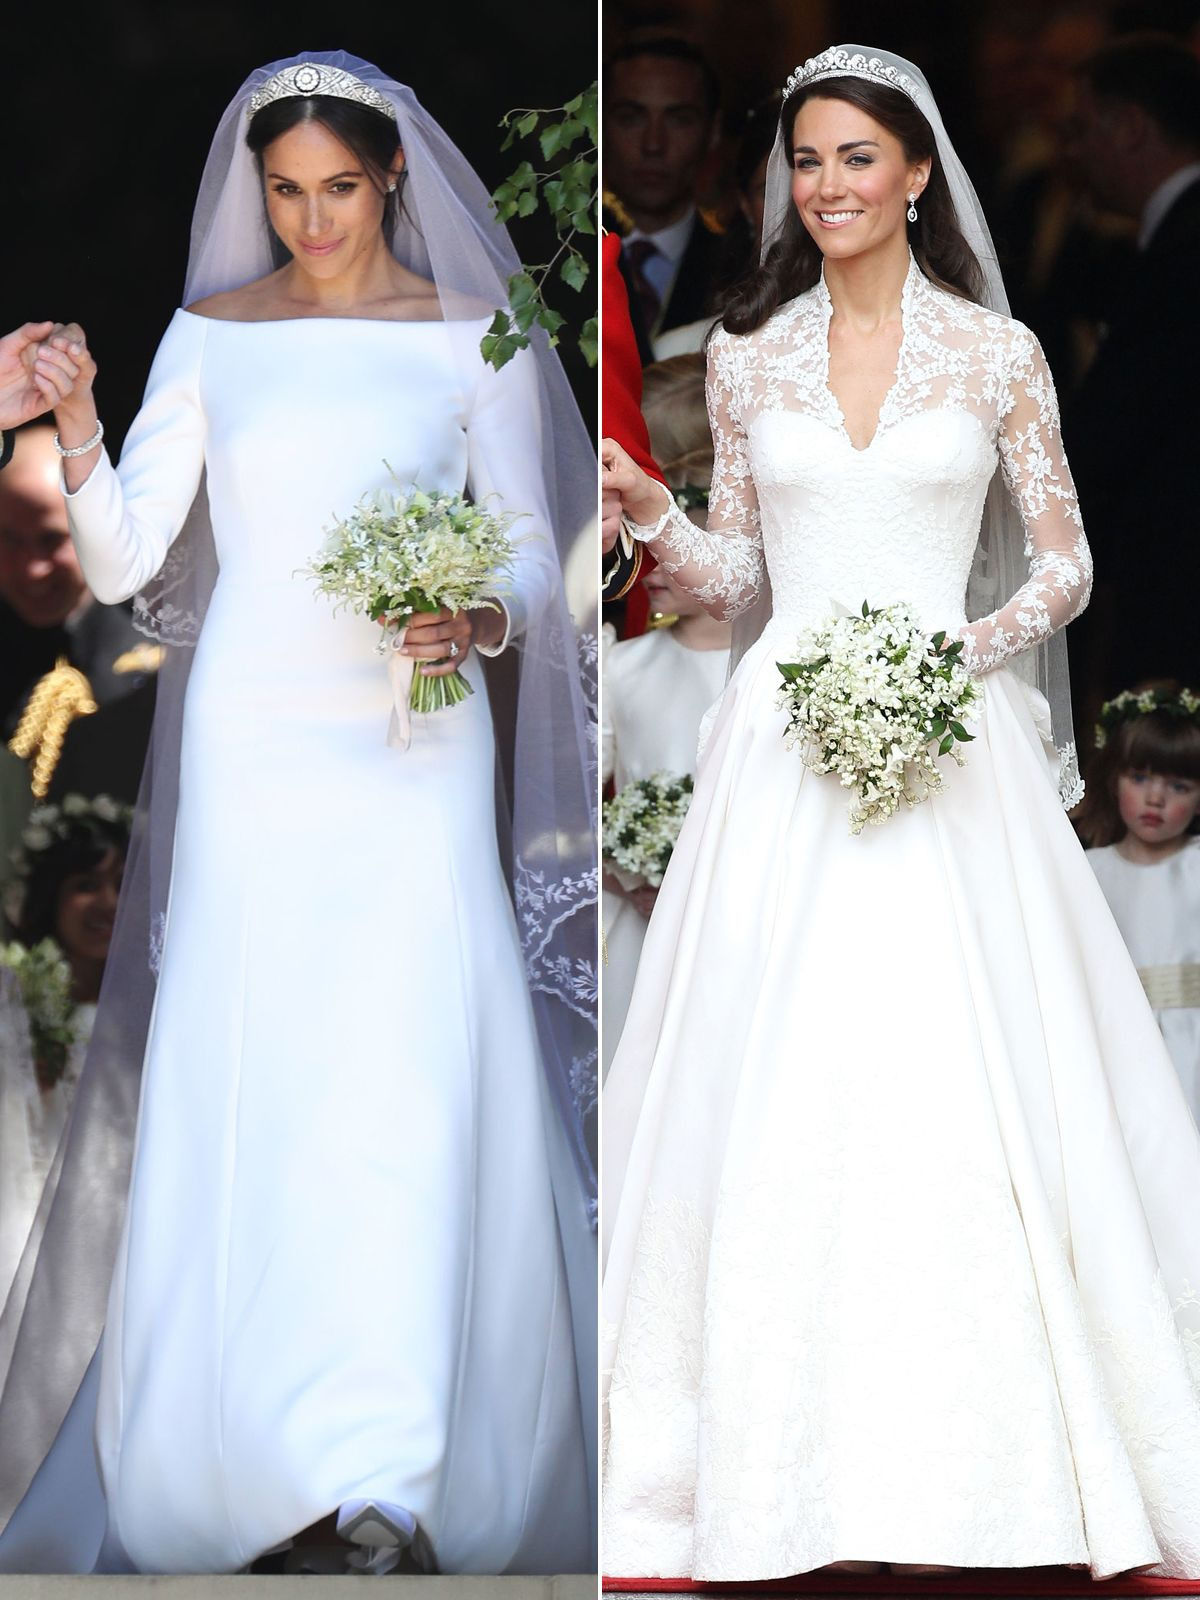 A Side-By-Side Comparison Of Kate &amp; Meghan's Royal Weddings